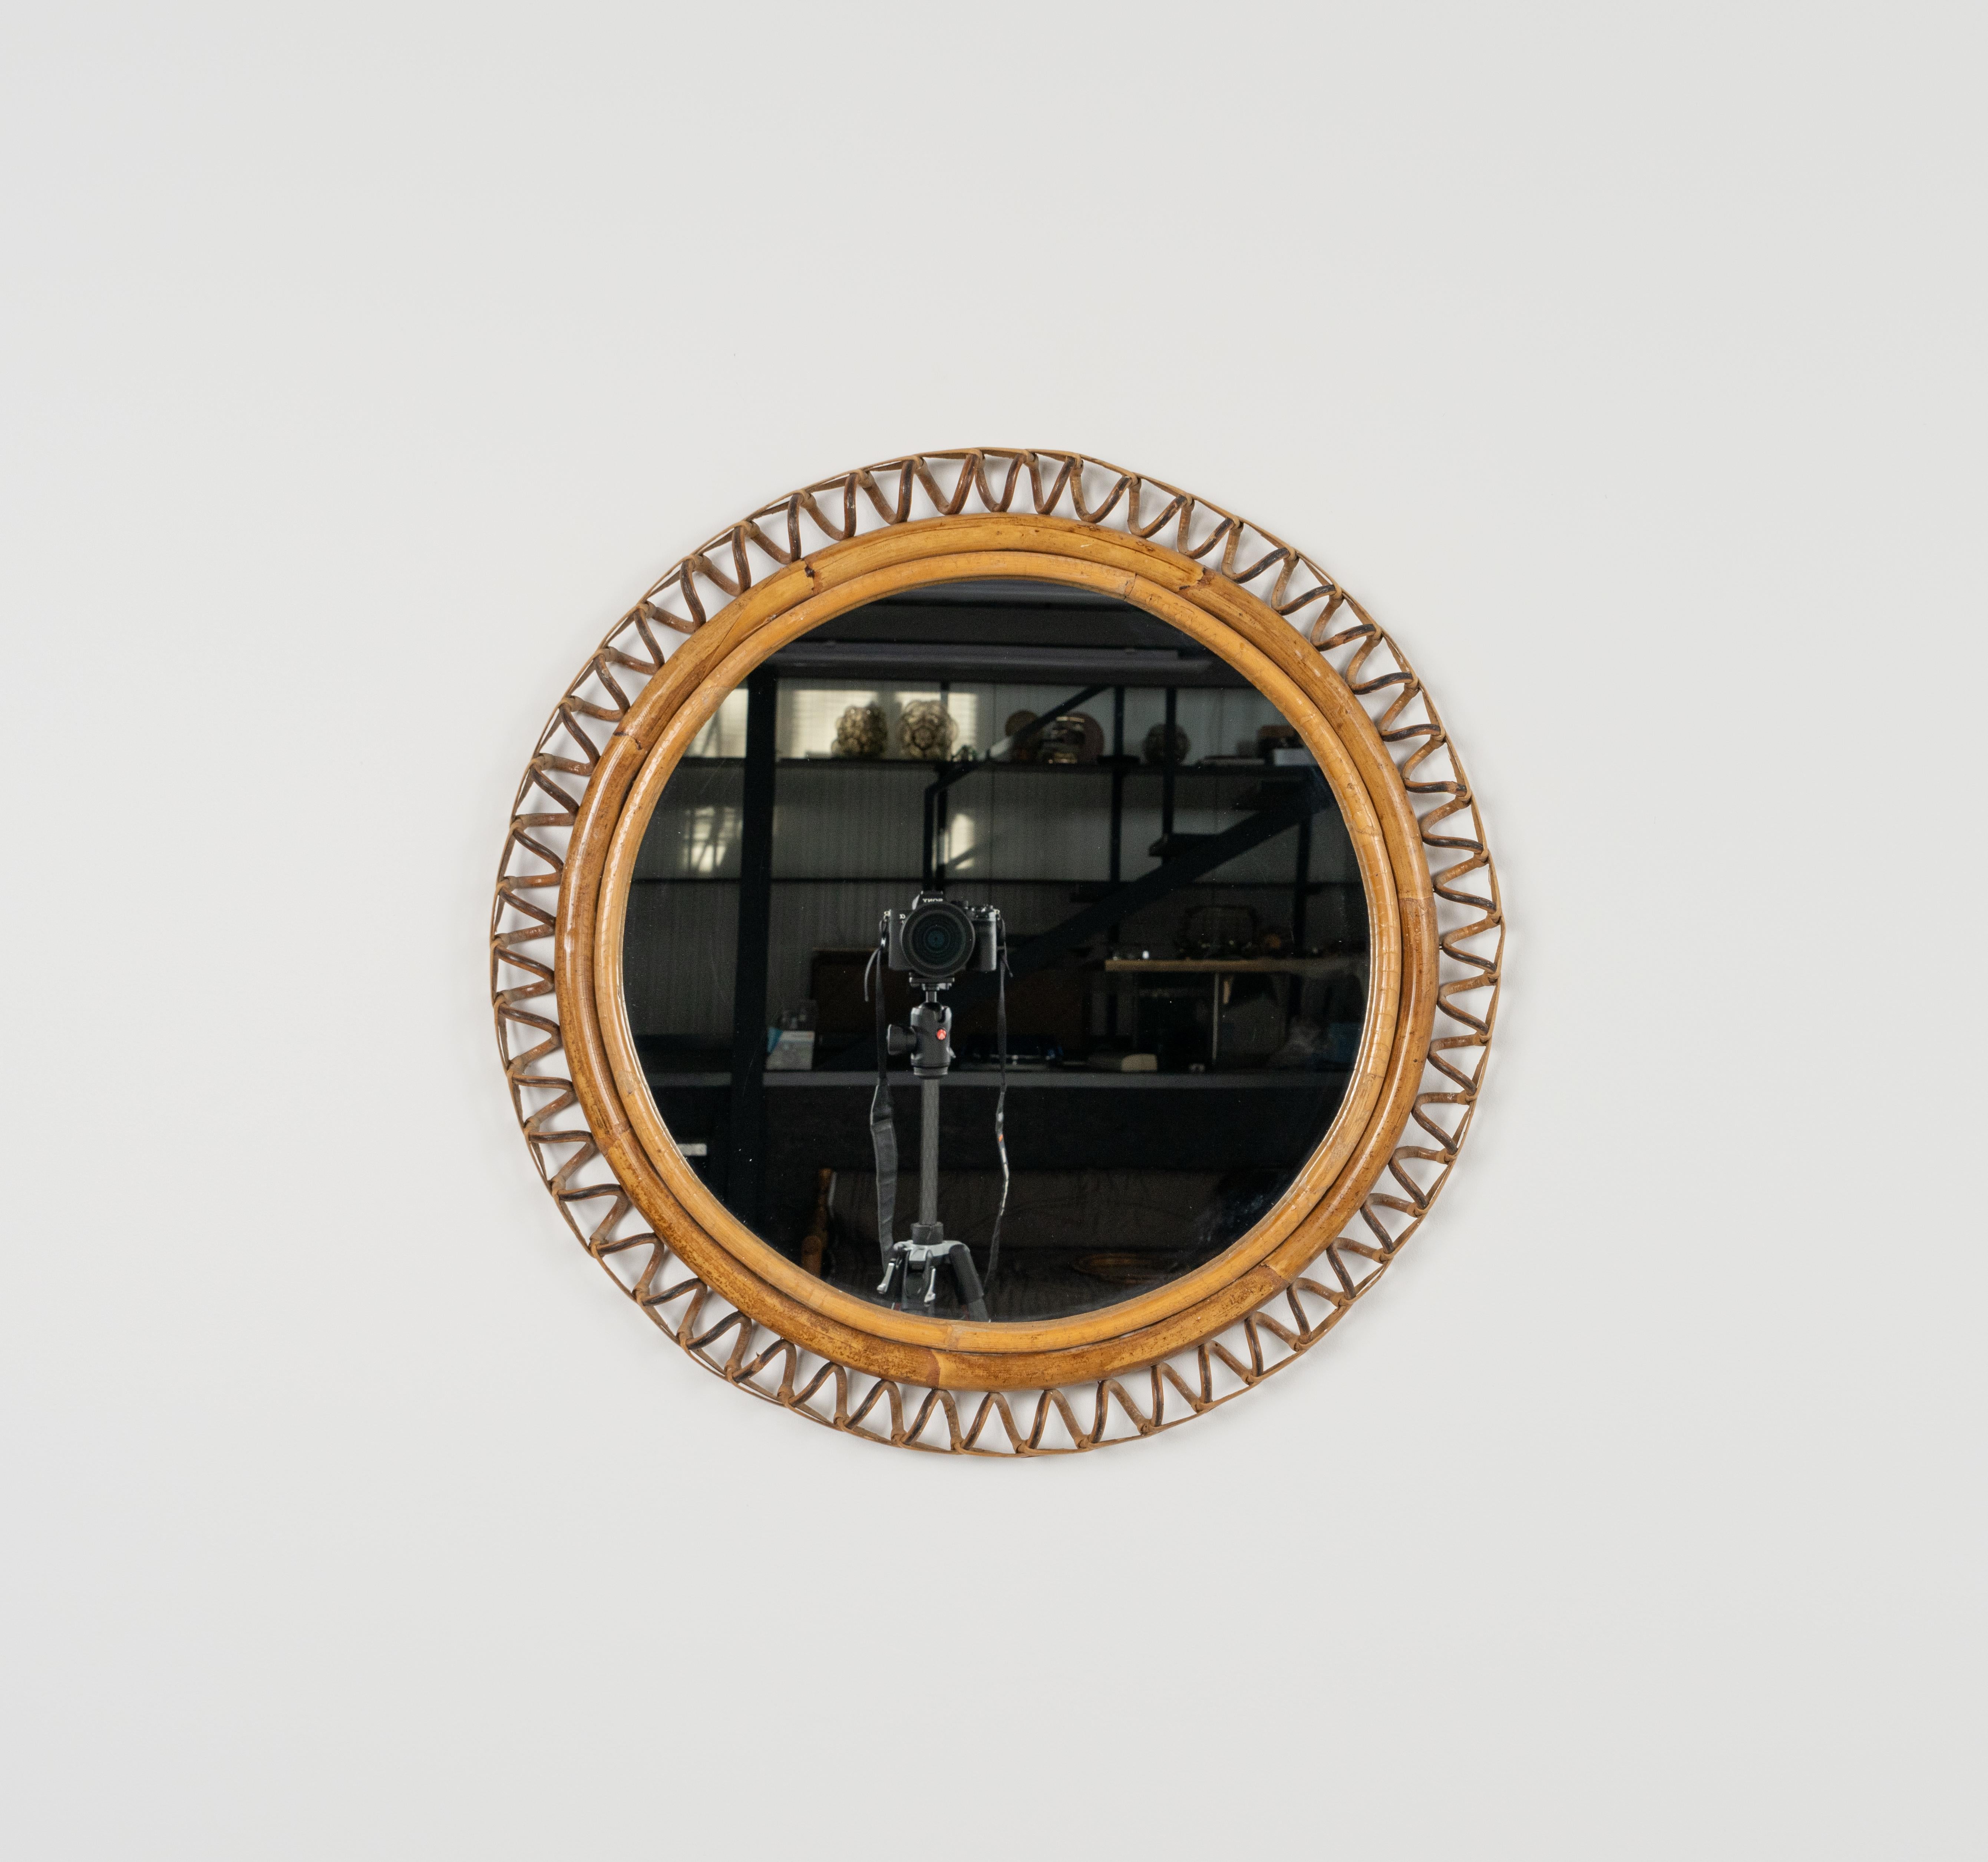 Midcentury beautiful round wall mirror in bamboo and rattan in the style of Italian design Franco Albini.  

Made in Italy in the 1960s.

A highly decorative mirror.